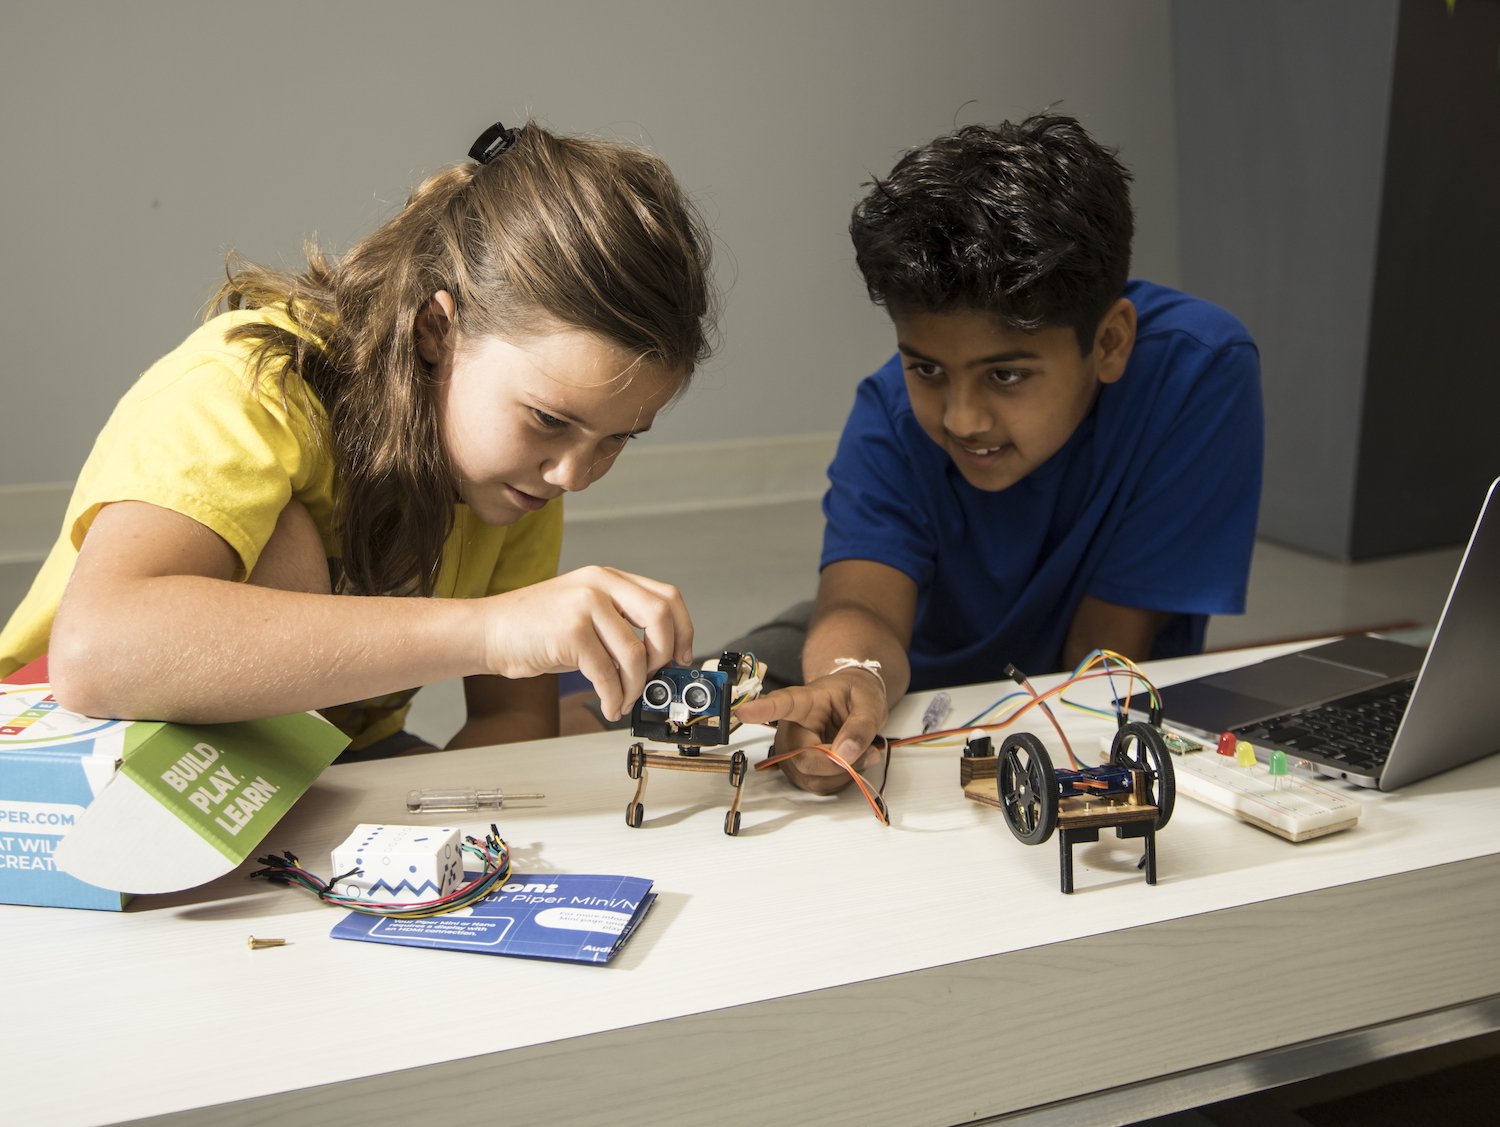 Piper's Robotics Expedition kit shown with kids working on how to program the bots